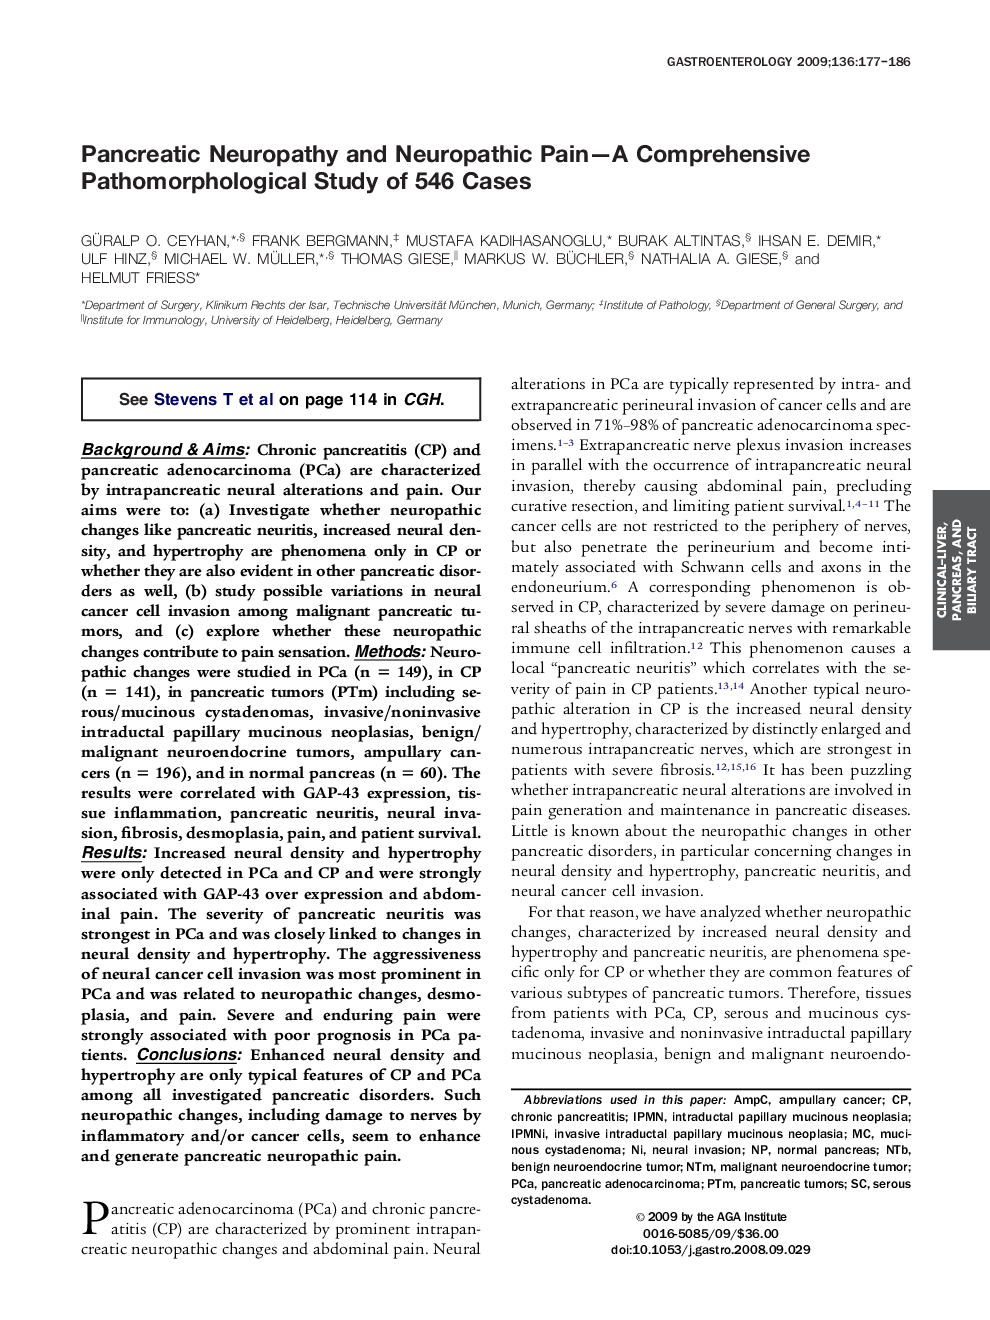 Pancreatic Neuropathy and Neuropathic Pain-A Comprehensive Pathomorphological Study of 546 Cases